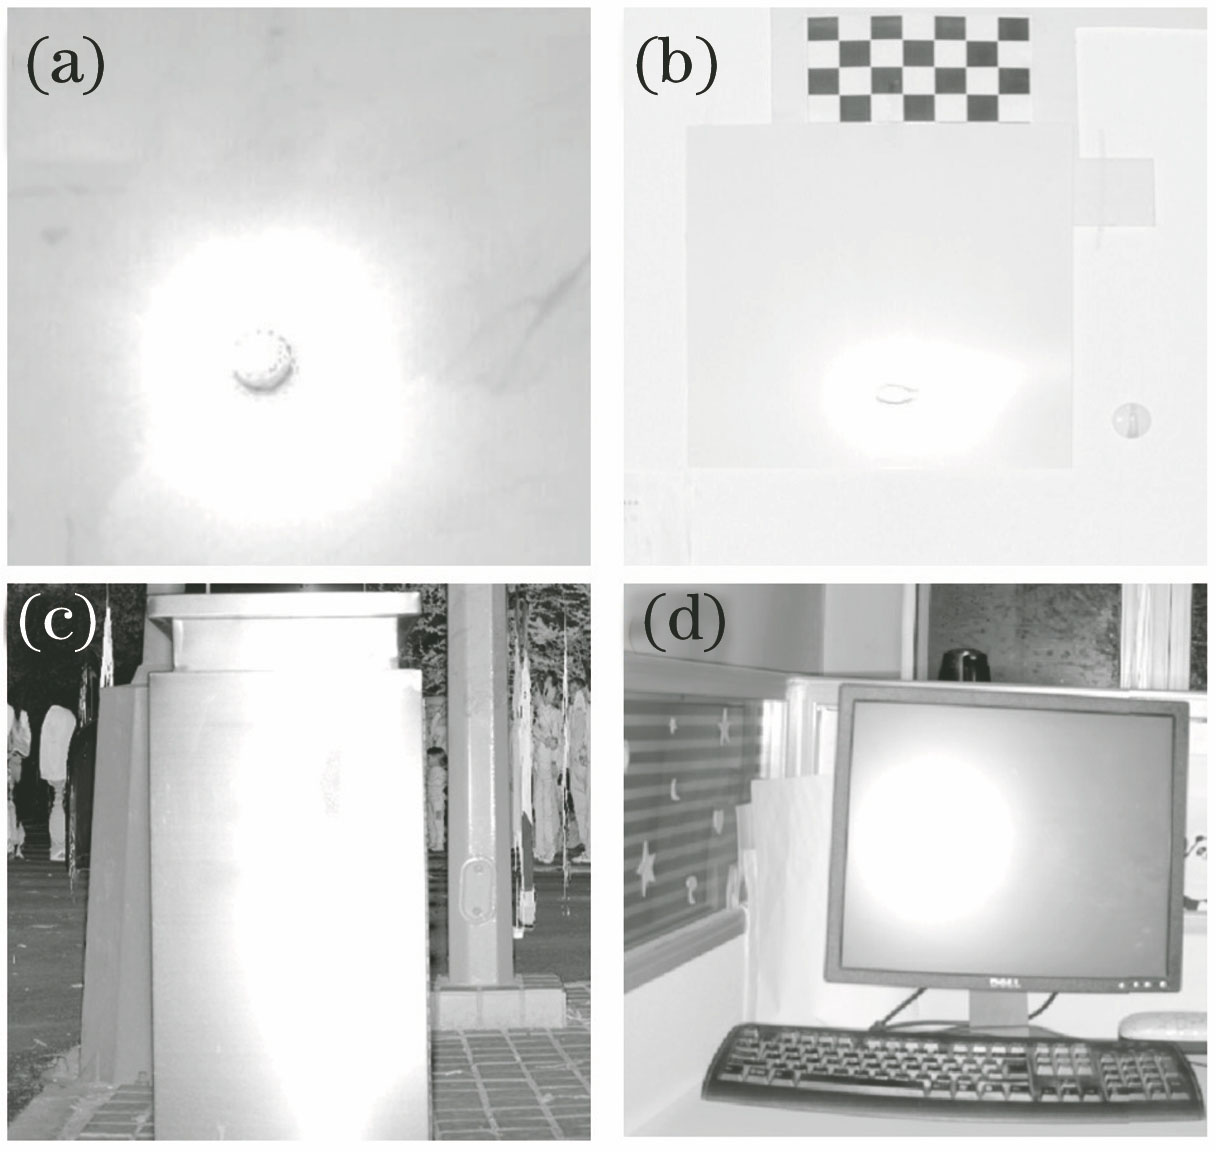 Original intensity images of four different kinds of material surfaces. (a) Ceramic tile; (b) polyethylene; (c) stainless garbage; (d) LCD screen